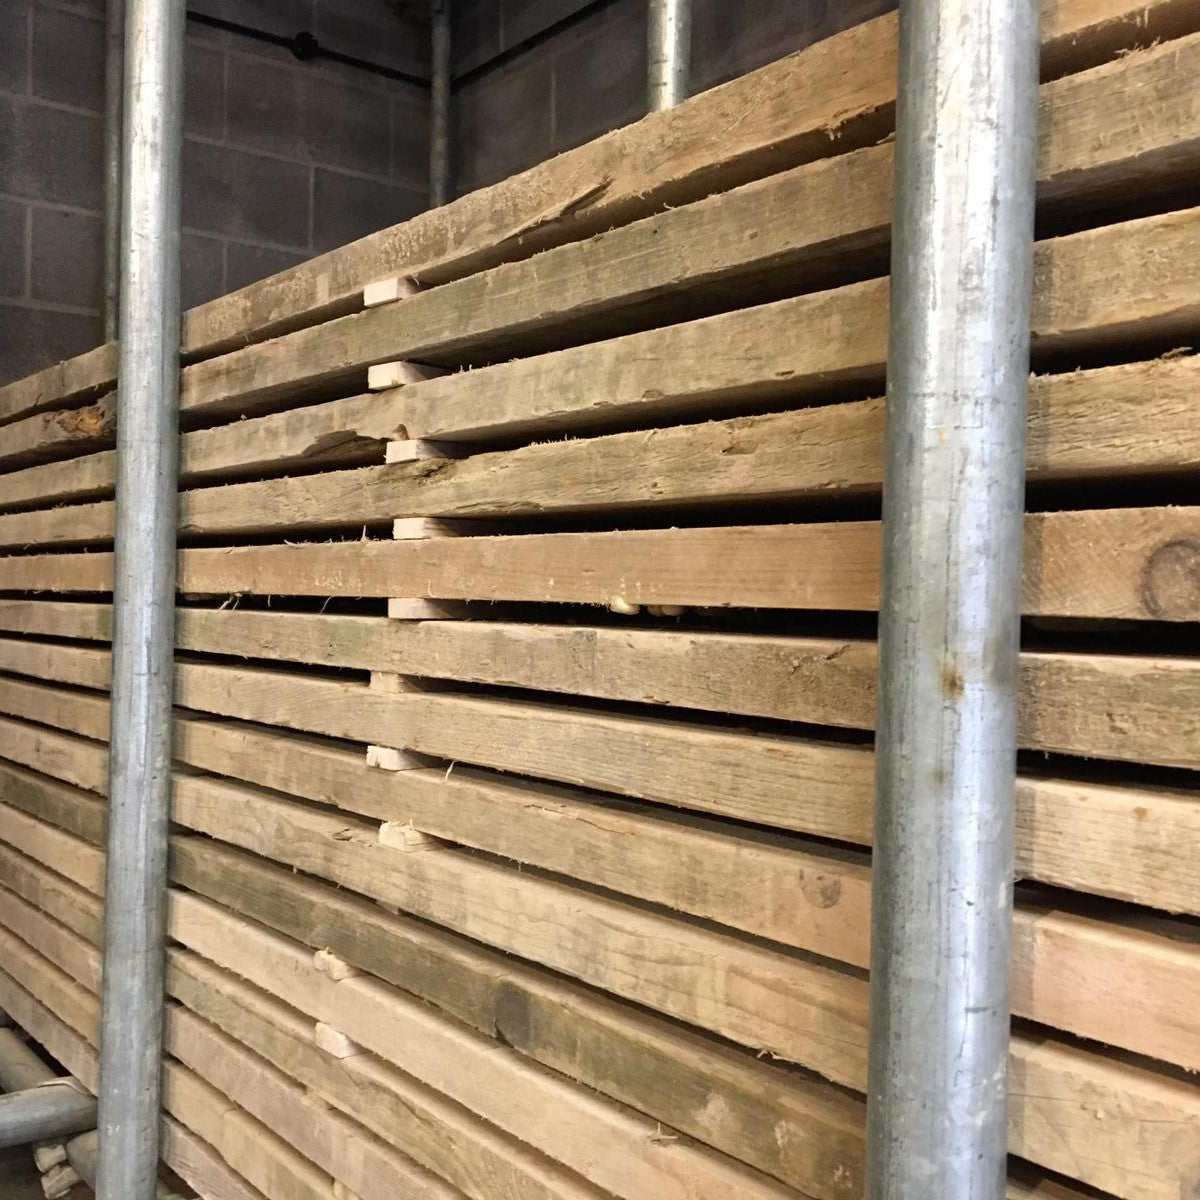 Scaffold Board Stacked For Drying